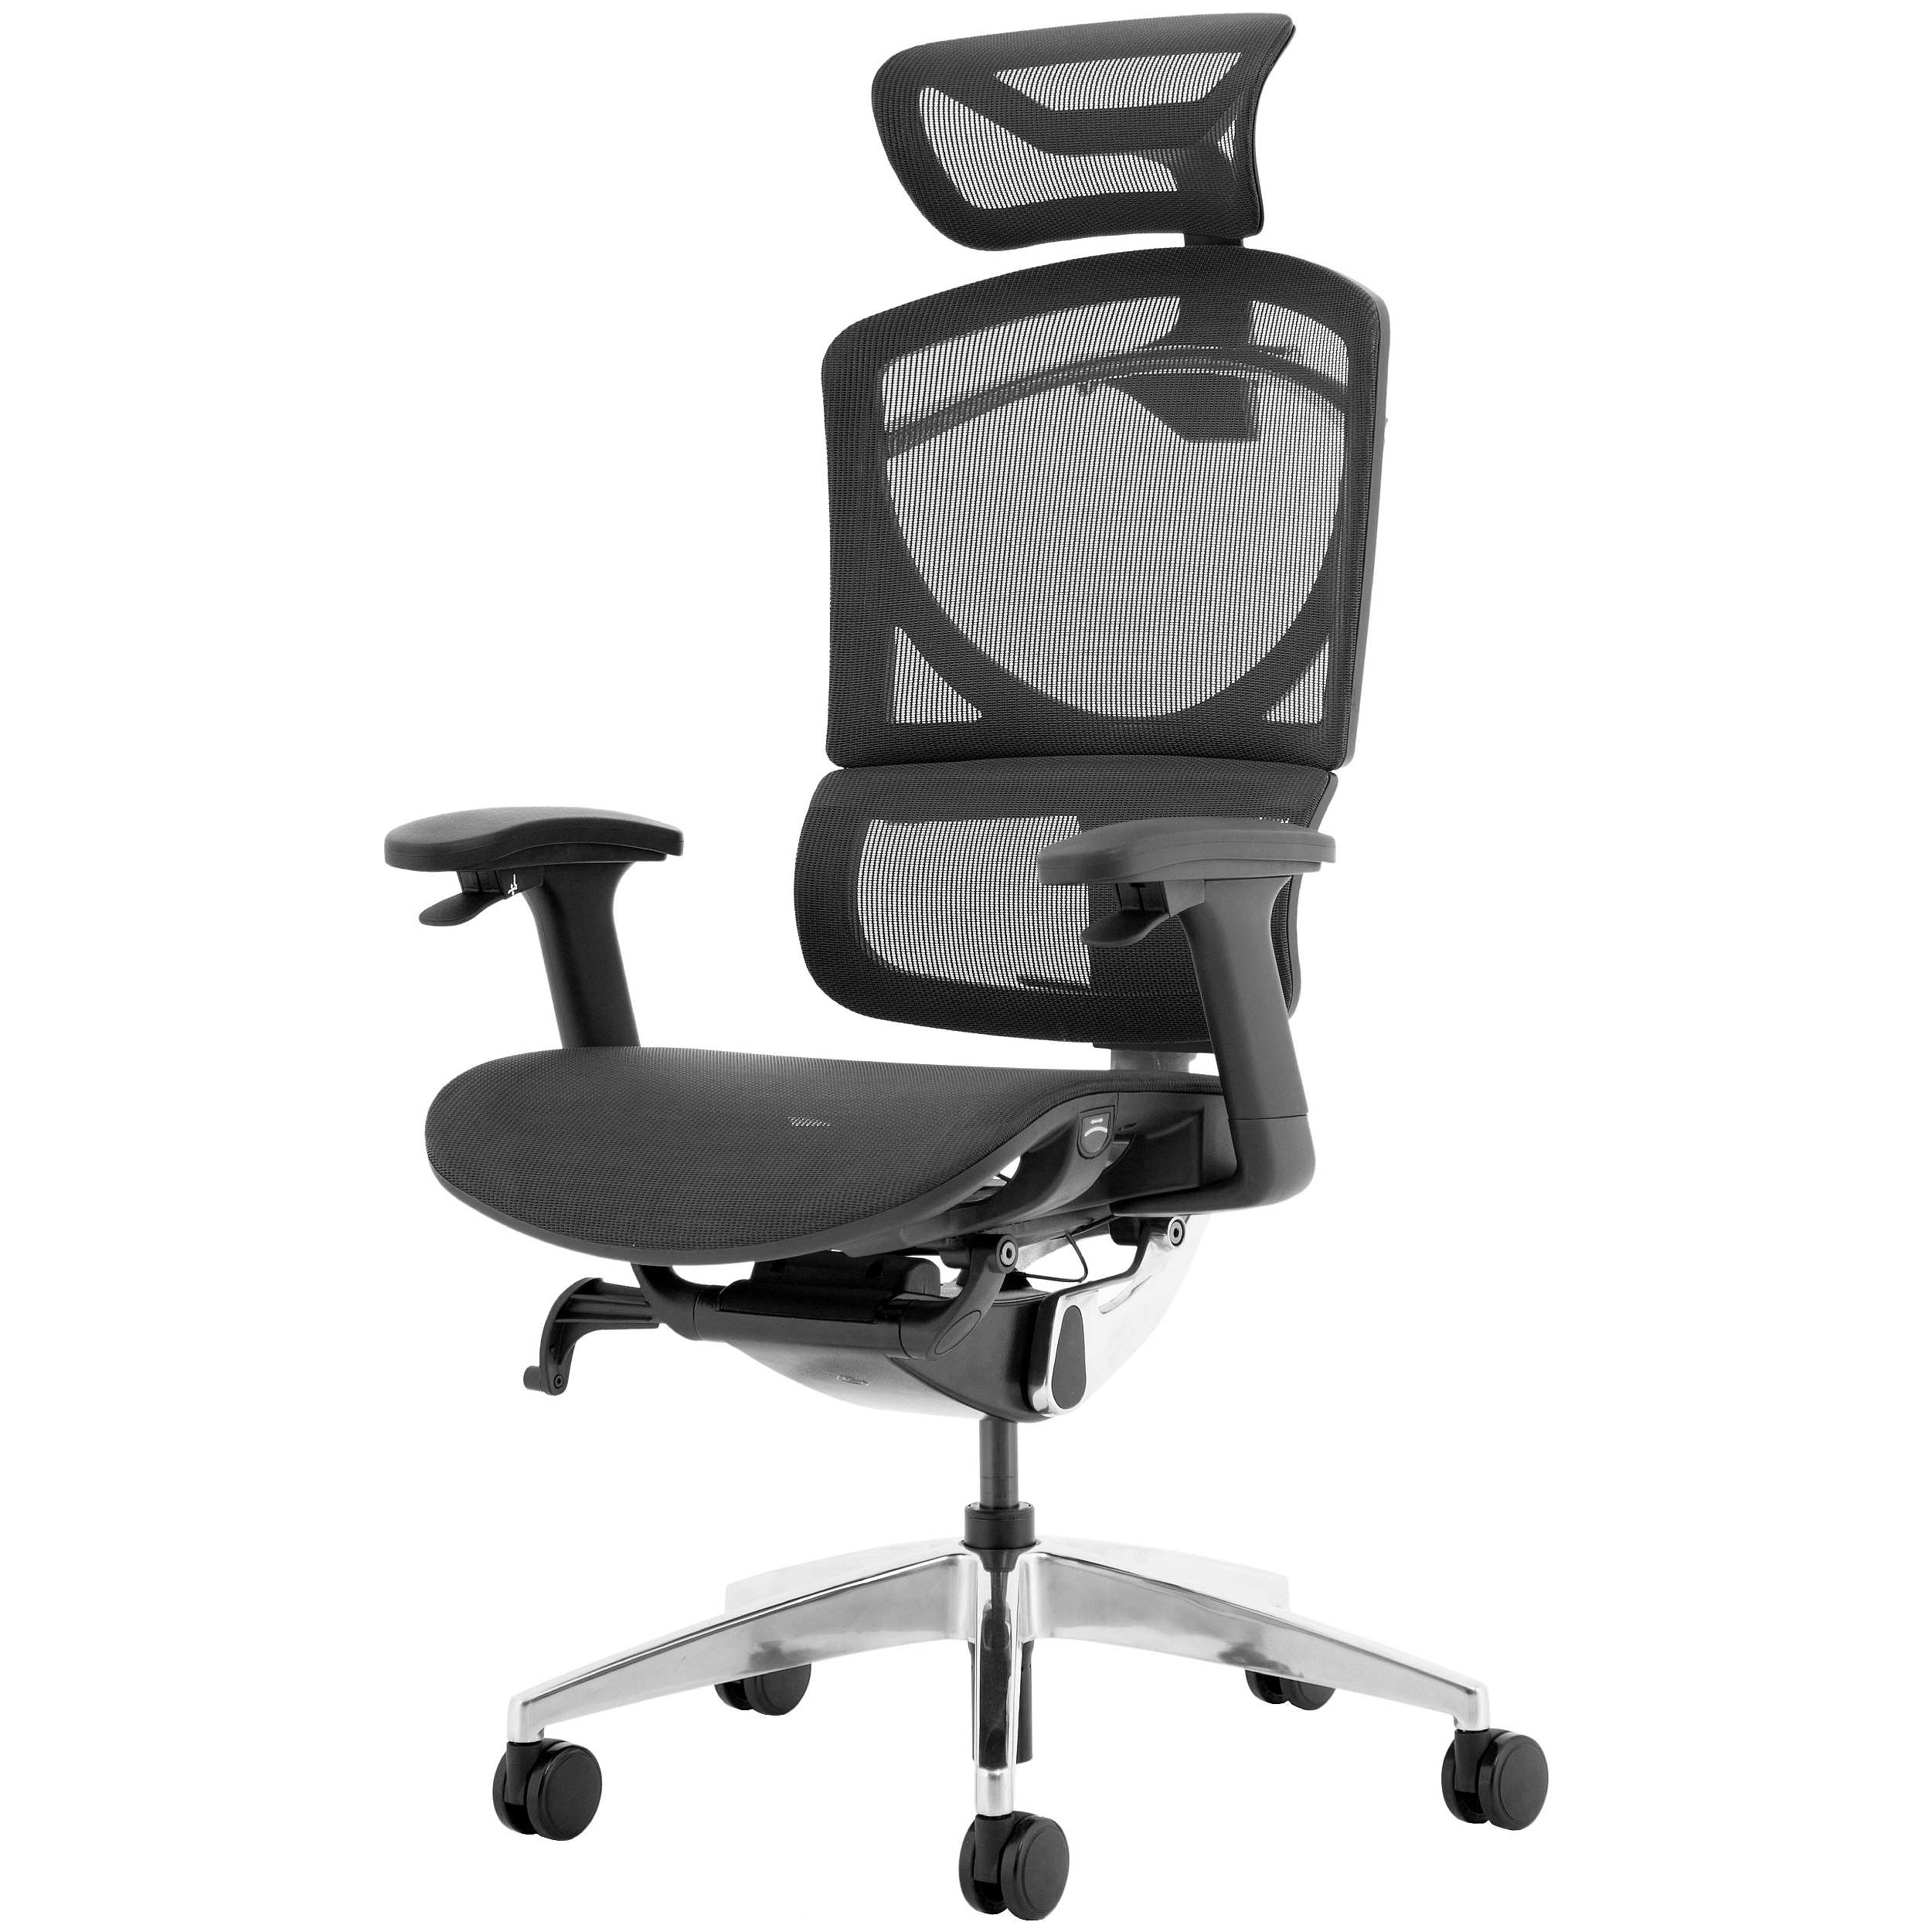 Curved What Is The Best Desk Chair For Posture with RGB